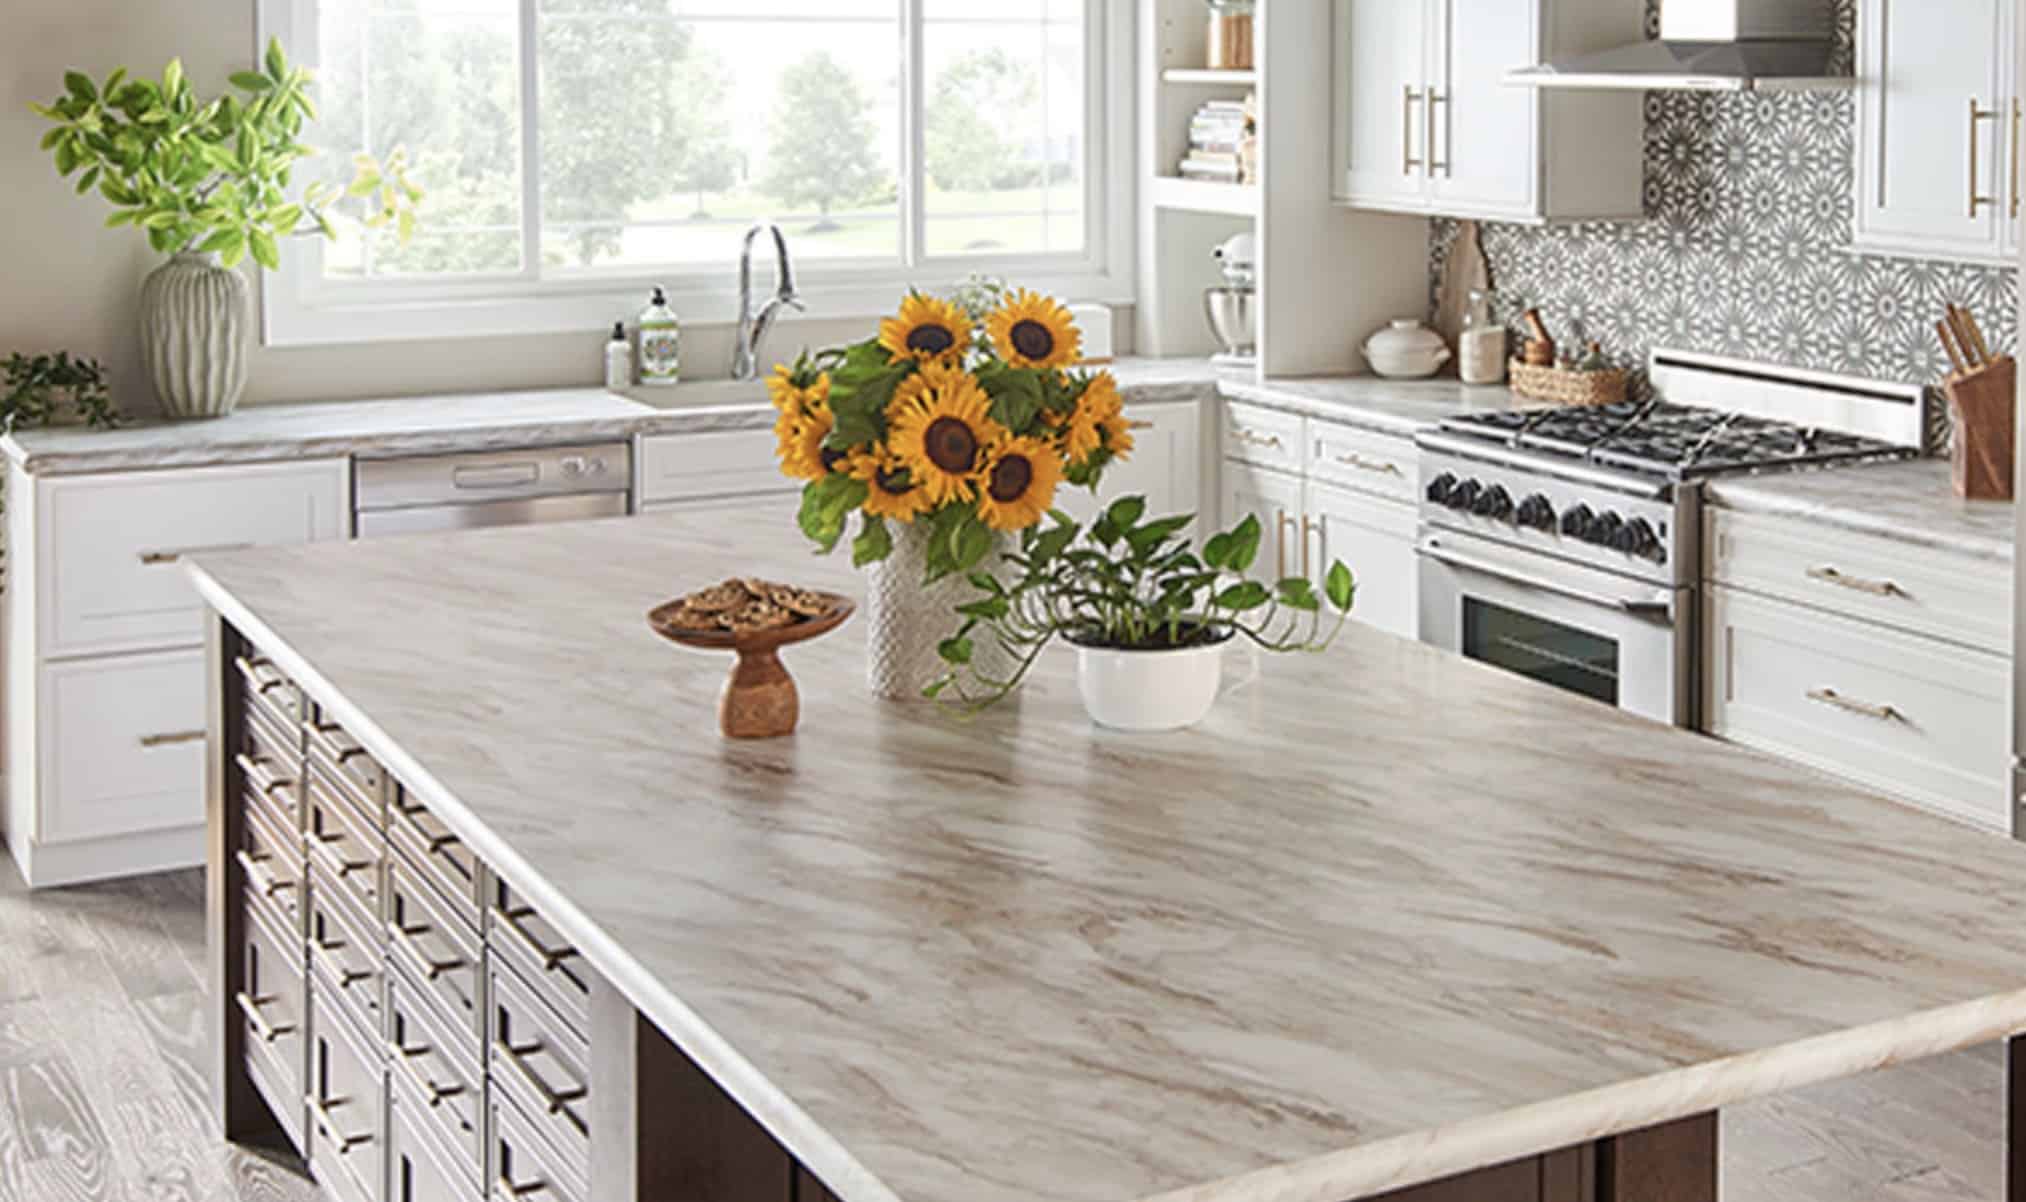 Installing Laminate Countertops, How Much Does It Cost To Install Plastic Laminate Countertop